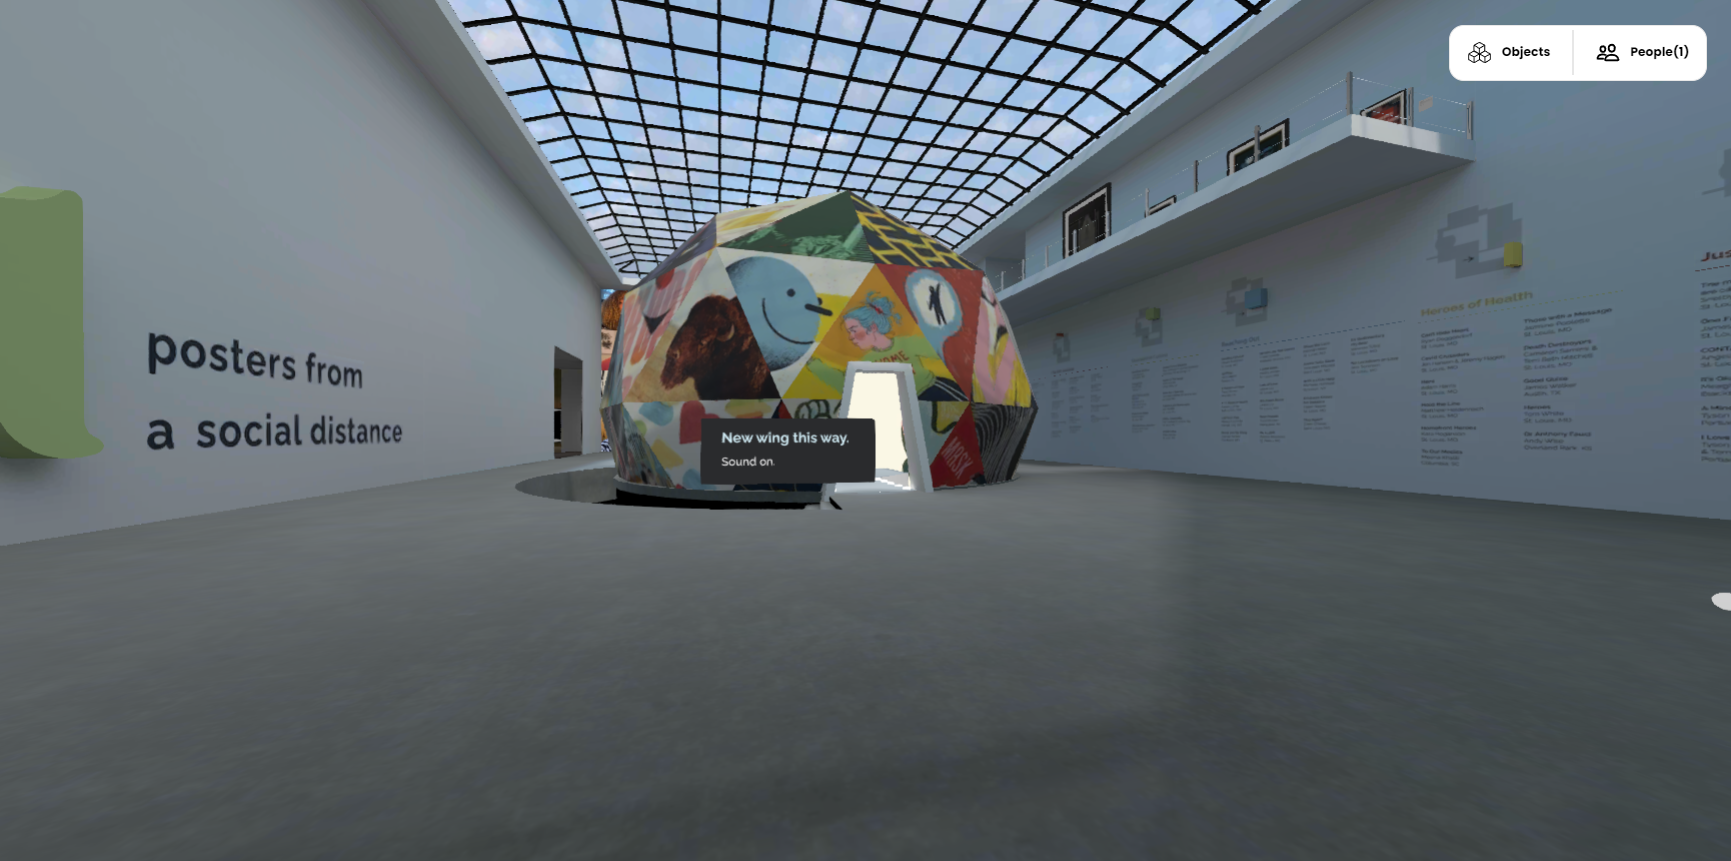 First impression from the Apart Gallery. Ahead is a geodome covered with art images. The surrounding space is a gray and white modern art gallery.